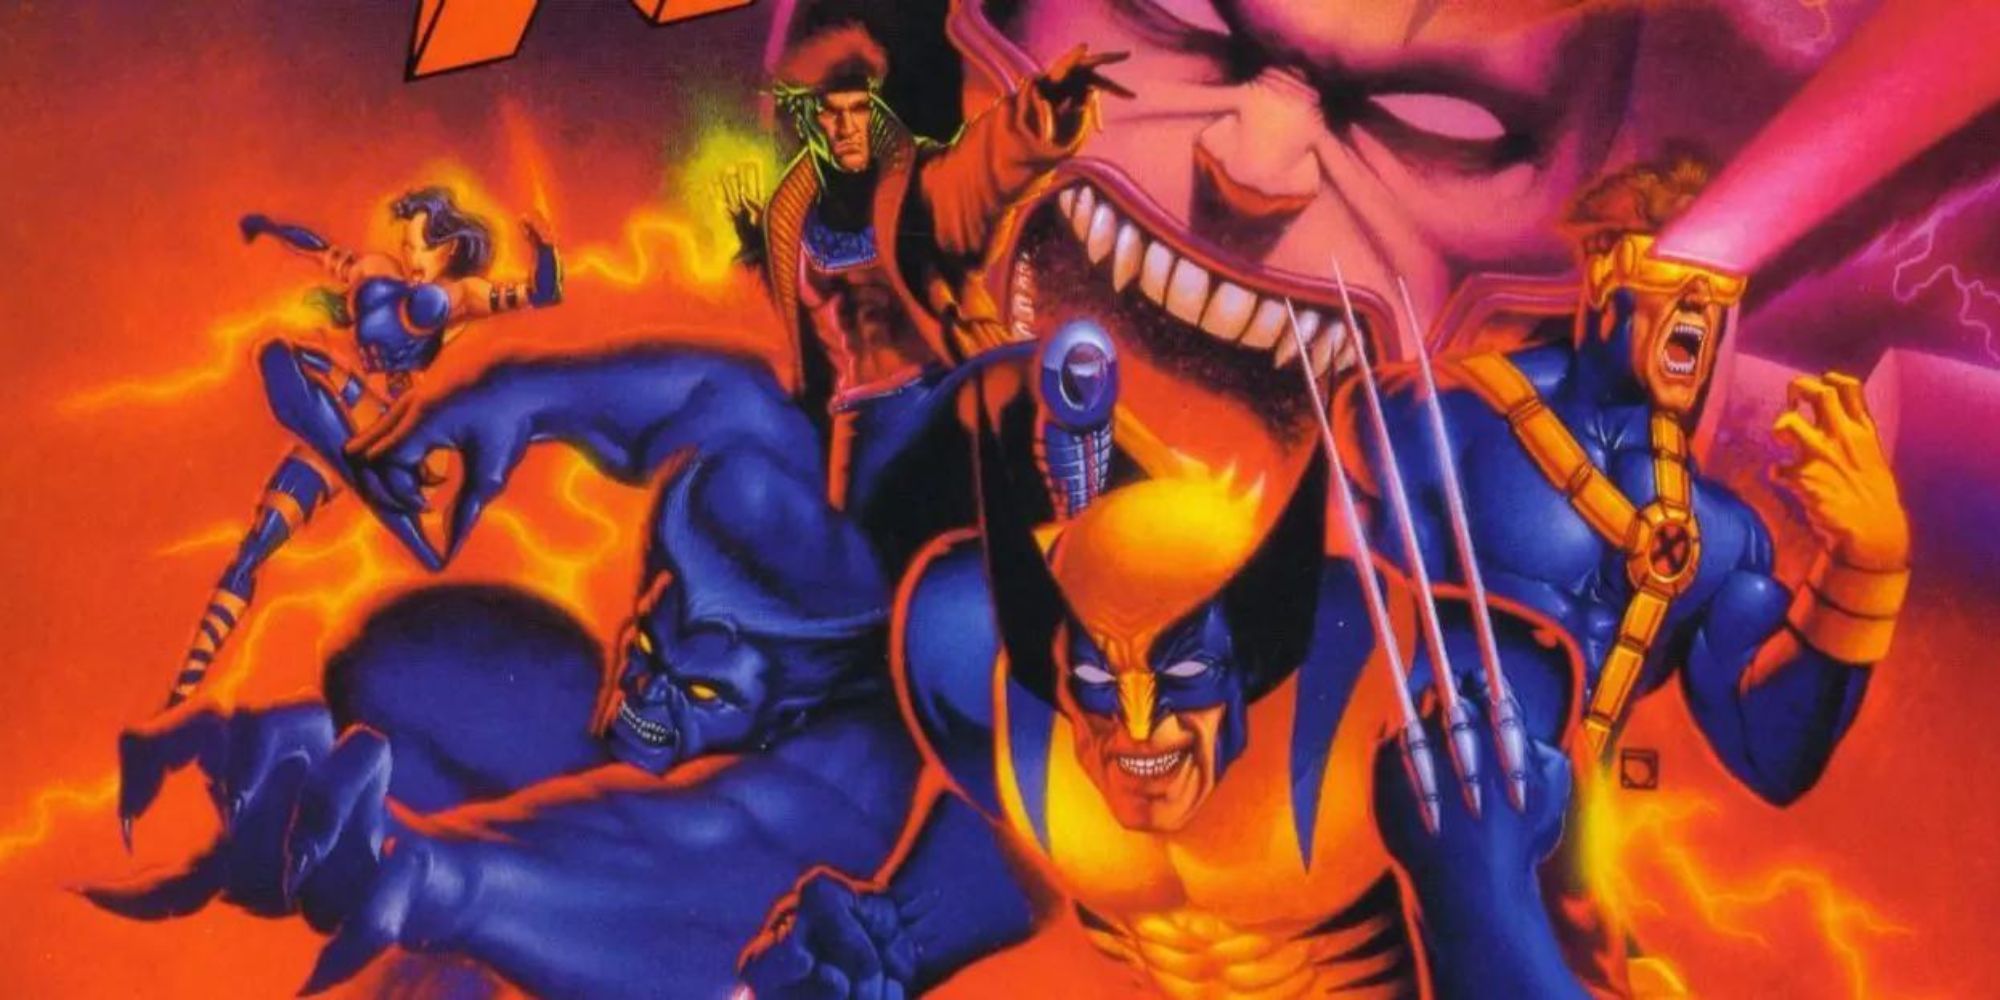 Wolverine, Beast, and Cyclops attack while Apocalypse laughs in the background